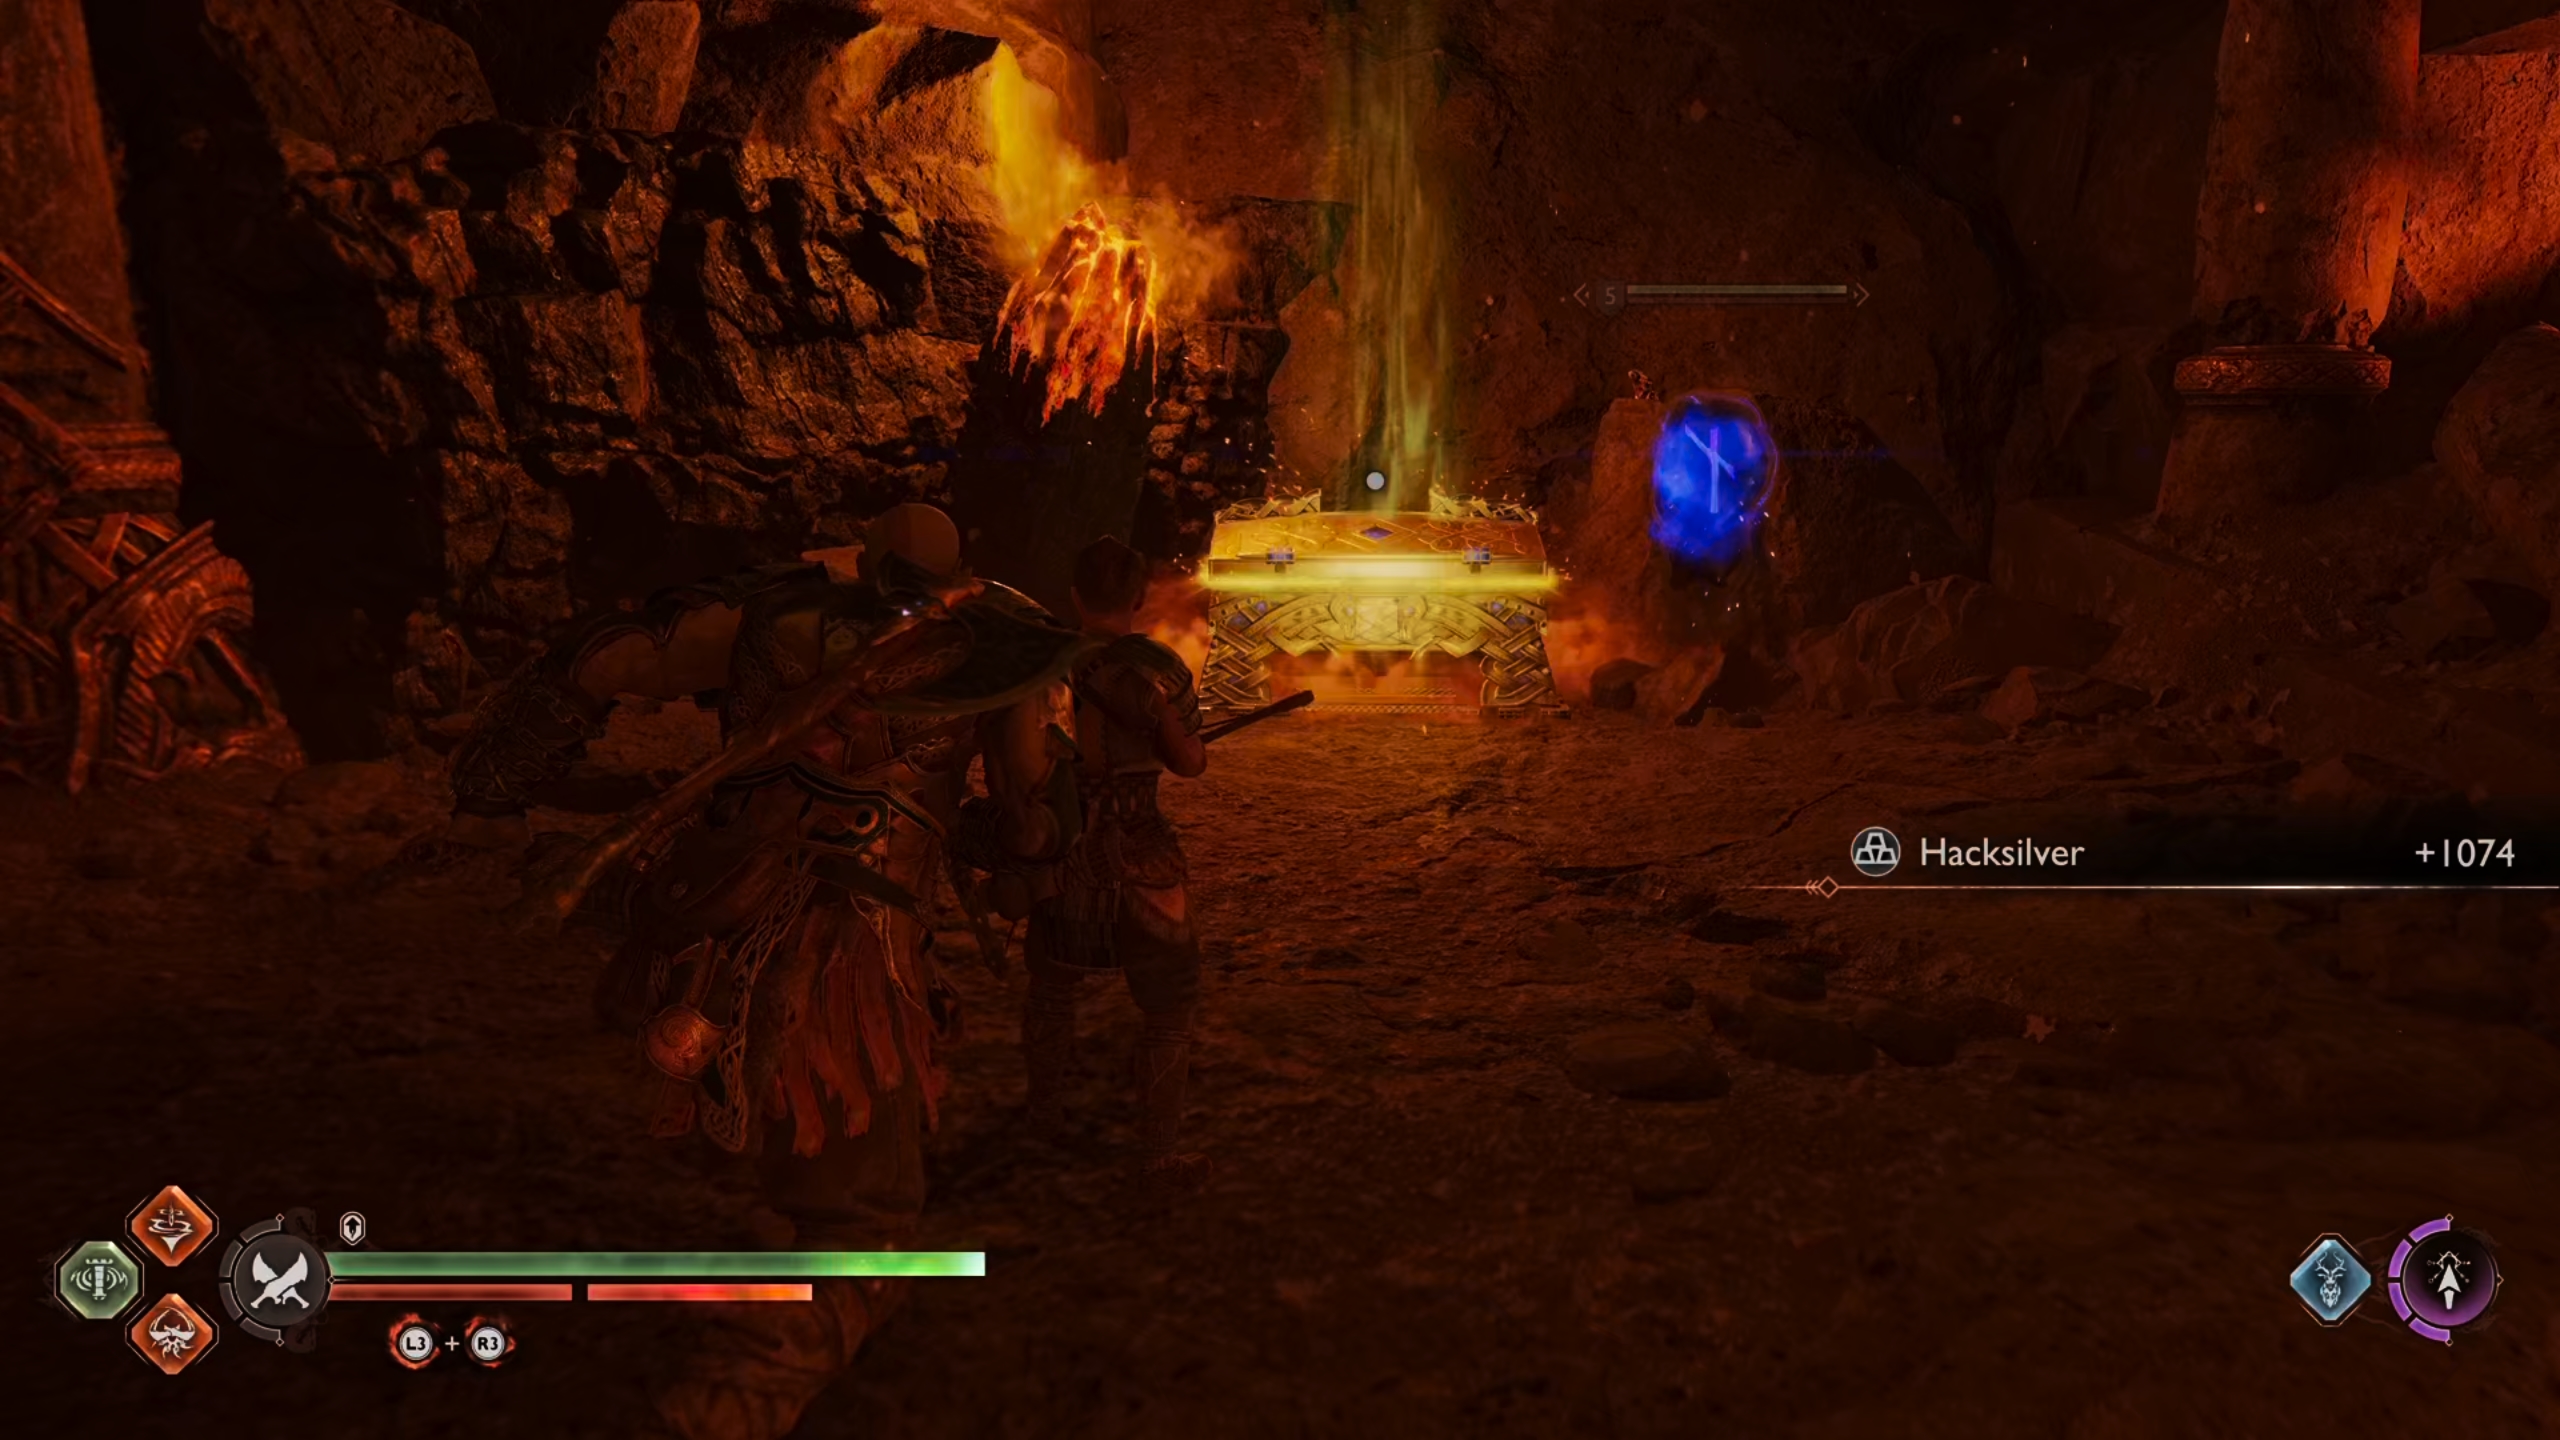 There are a number of wisps in this cave that you will need to deal with first.